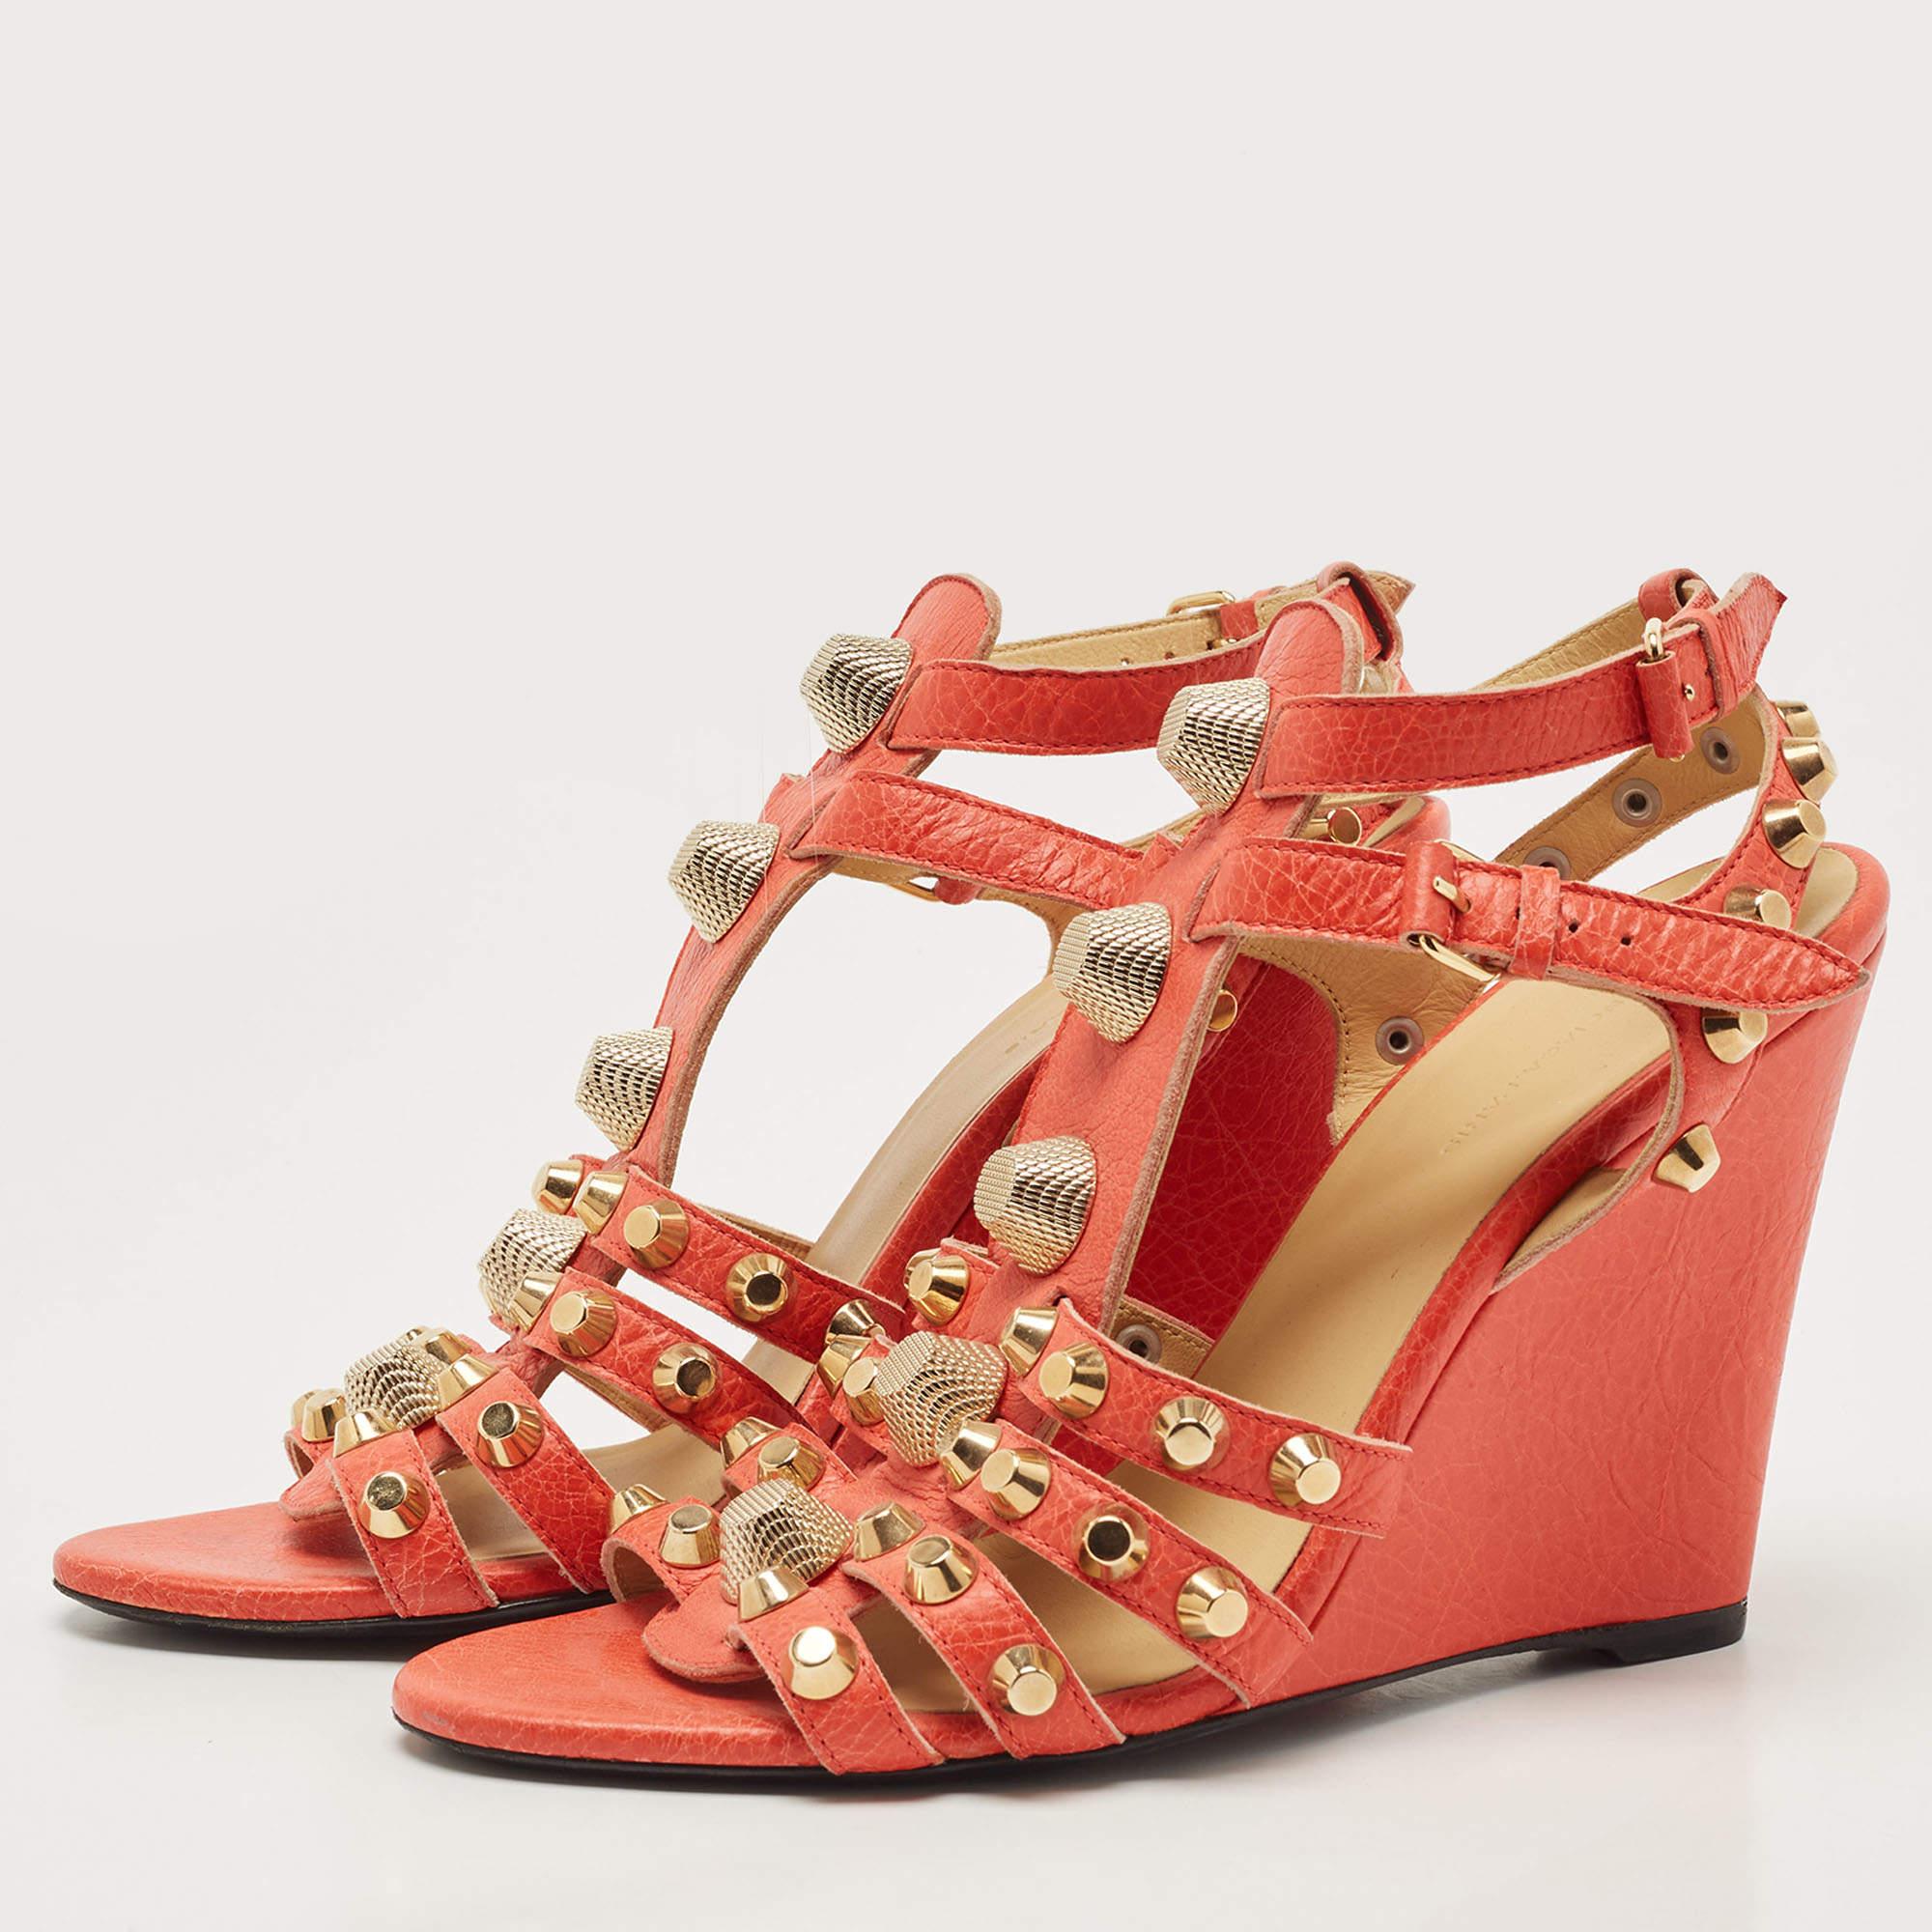 An orange shade, neat stitching, and stud details define this pair by Balenciaga. The sandals are crafted from leather and feature open toes, buckle fastening, and wedge heels.

